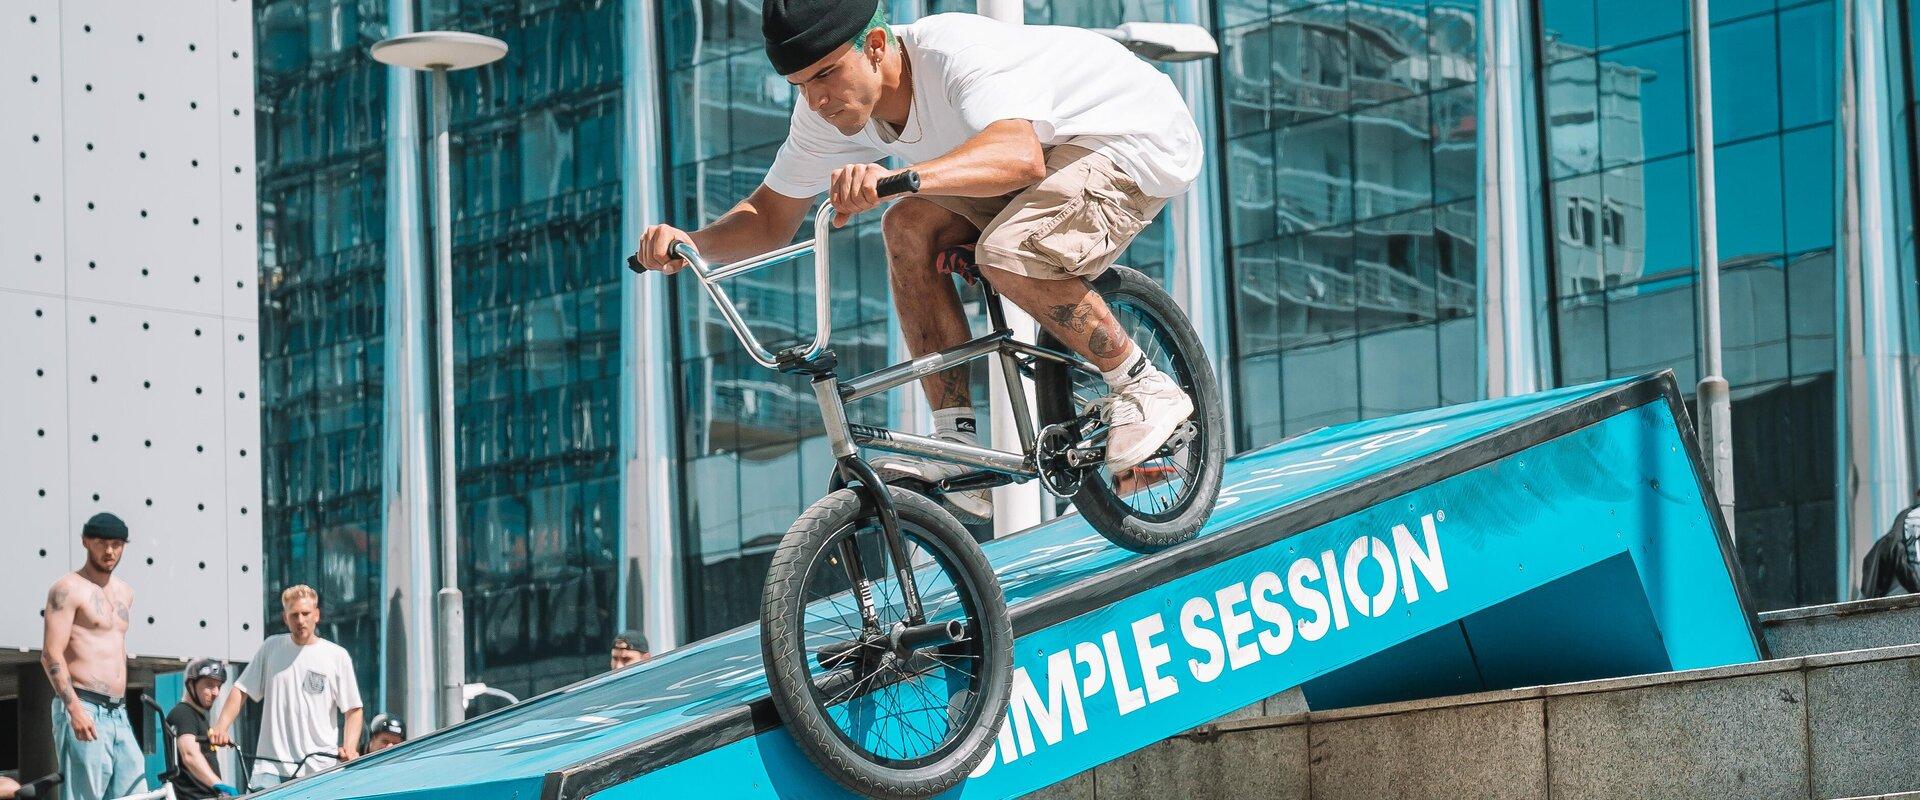 Simple Session, the most popular skateboarding and BMX competition of the year, is one of the most important events in Estonia! This extreme sports co